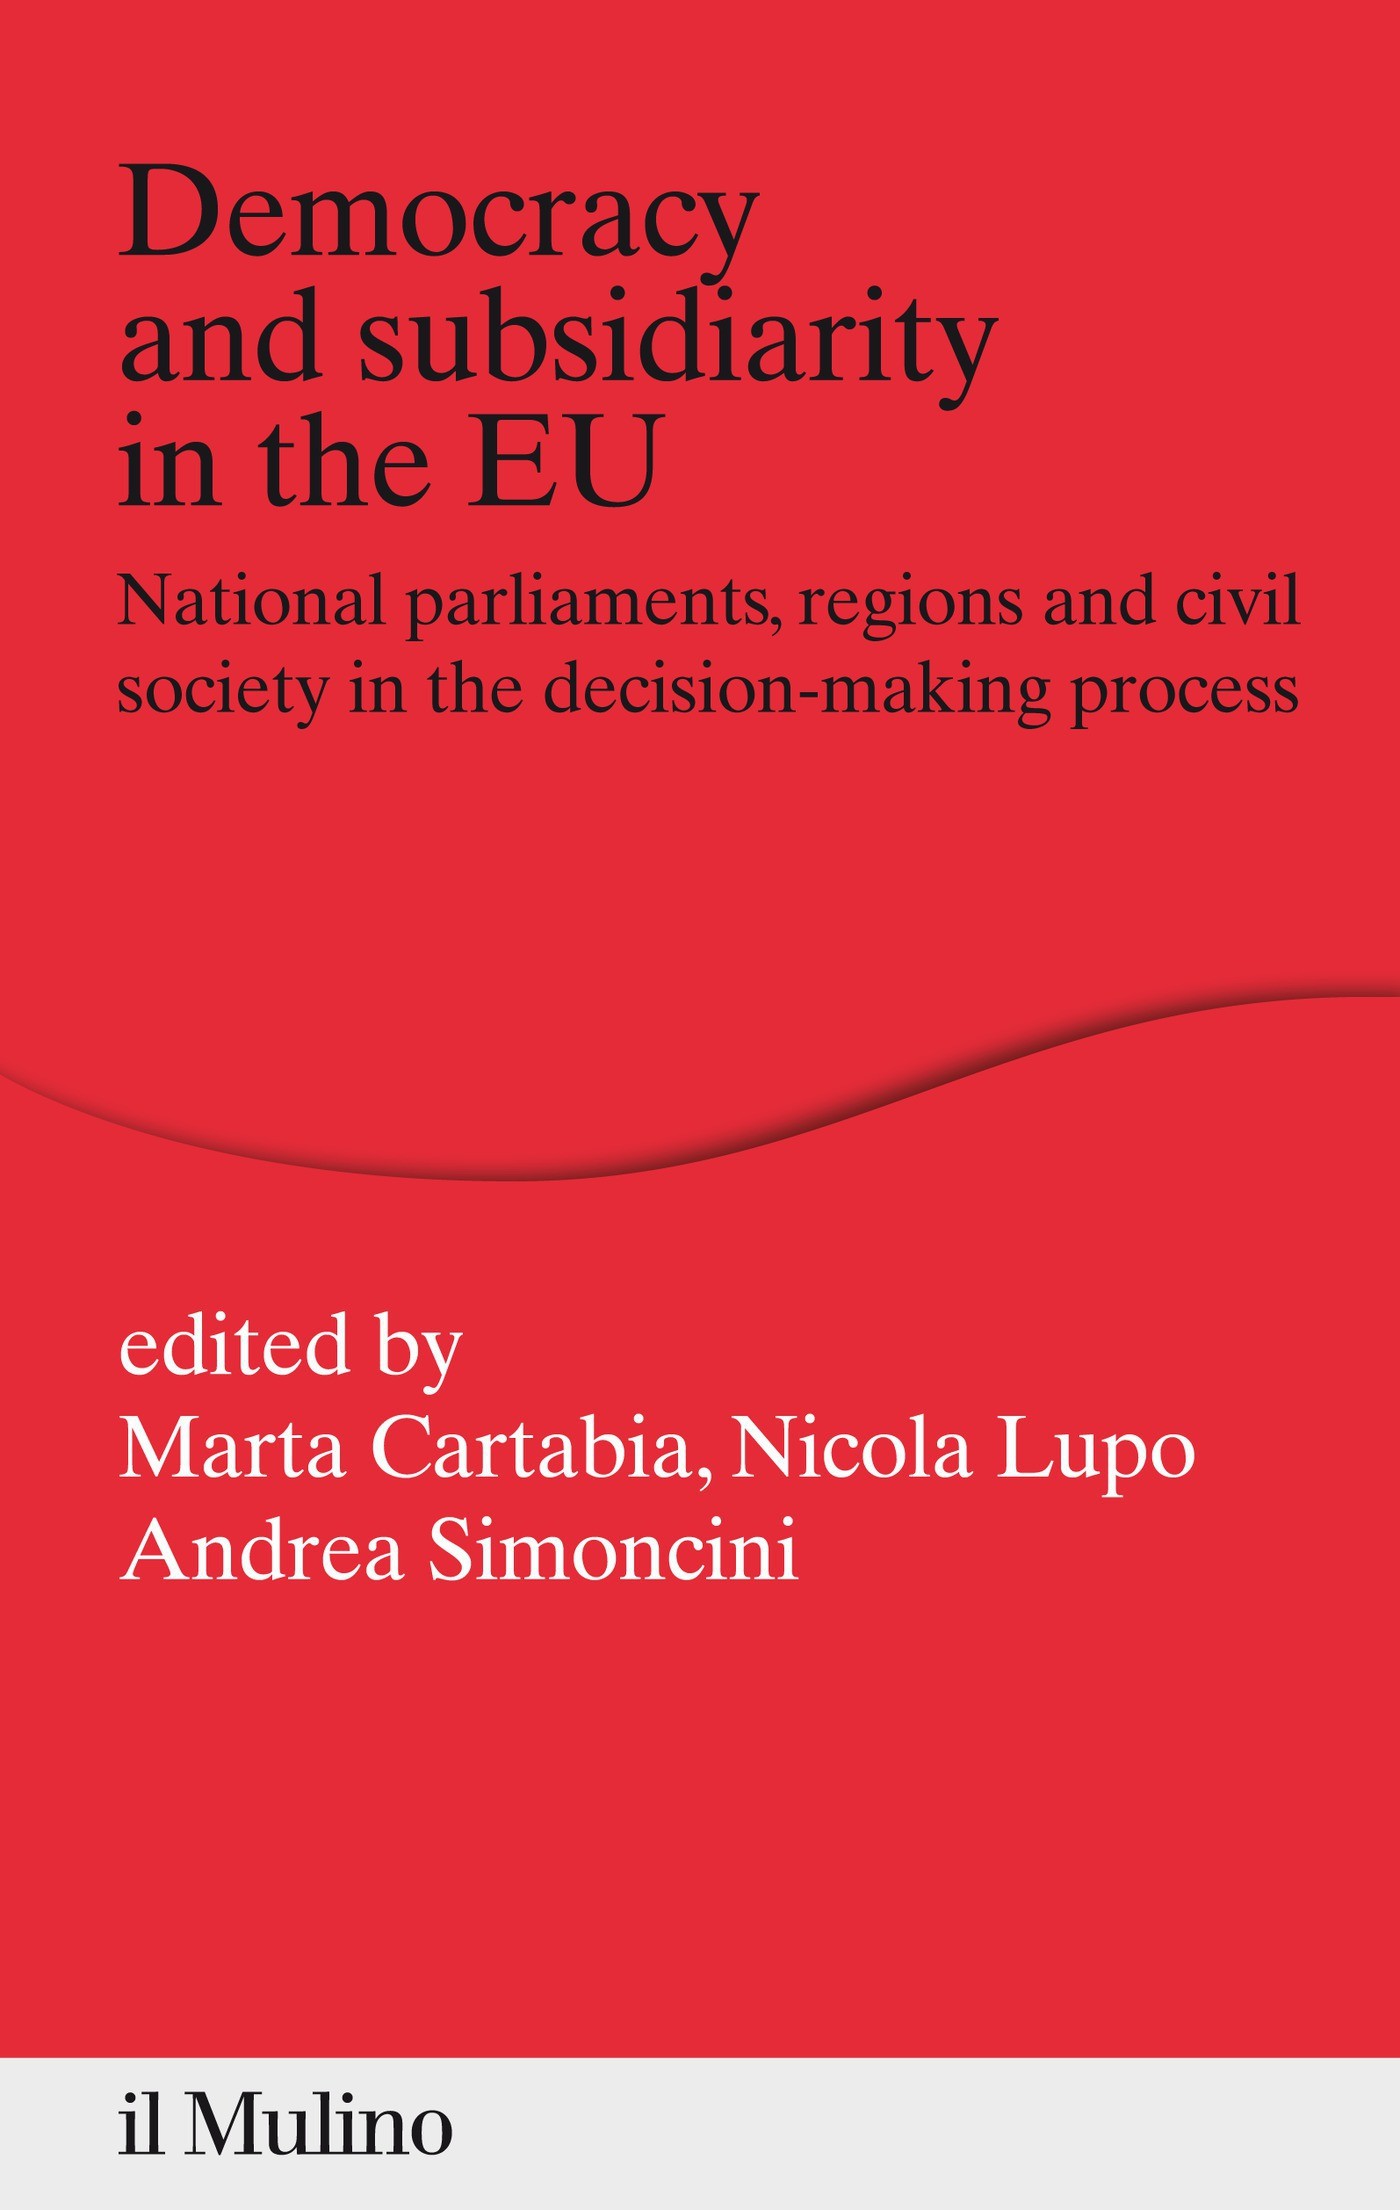 Democracy and subsidiarity in the Eu - Librerie.coop